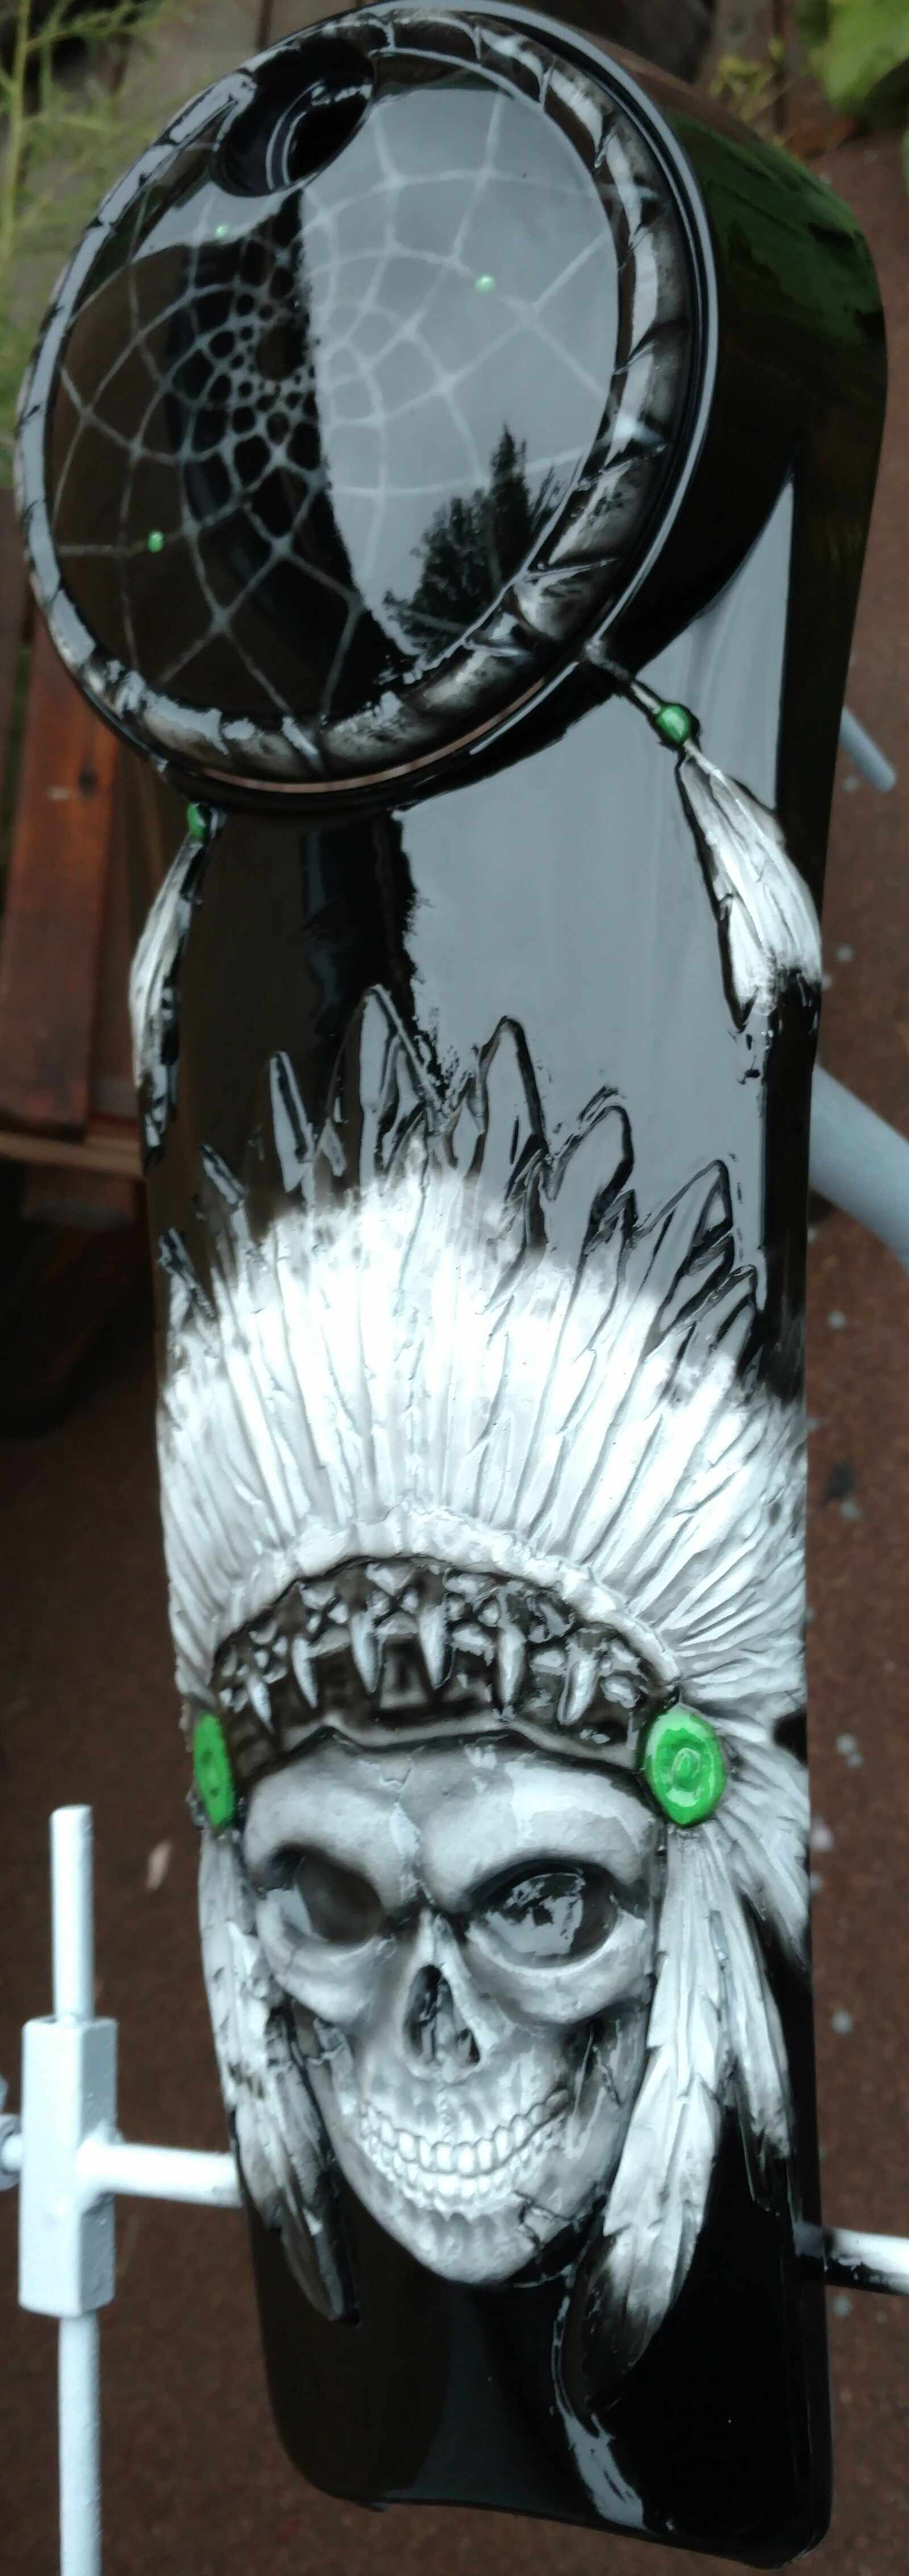 Harley Motorcycle Harley Indian Warbonnet Console